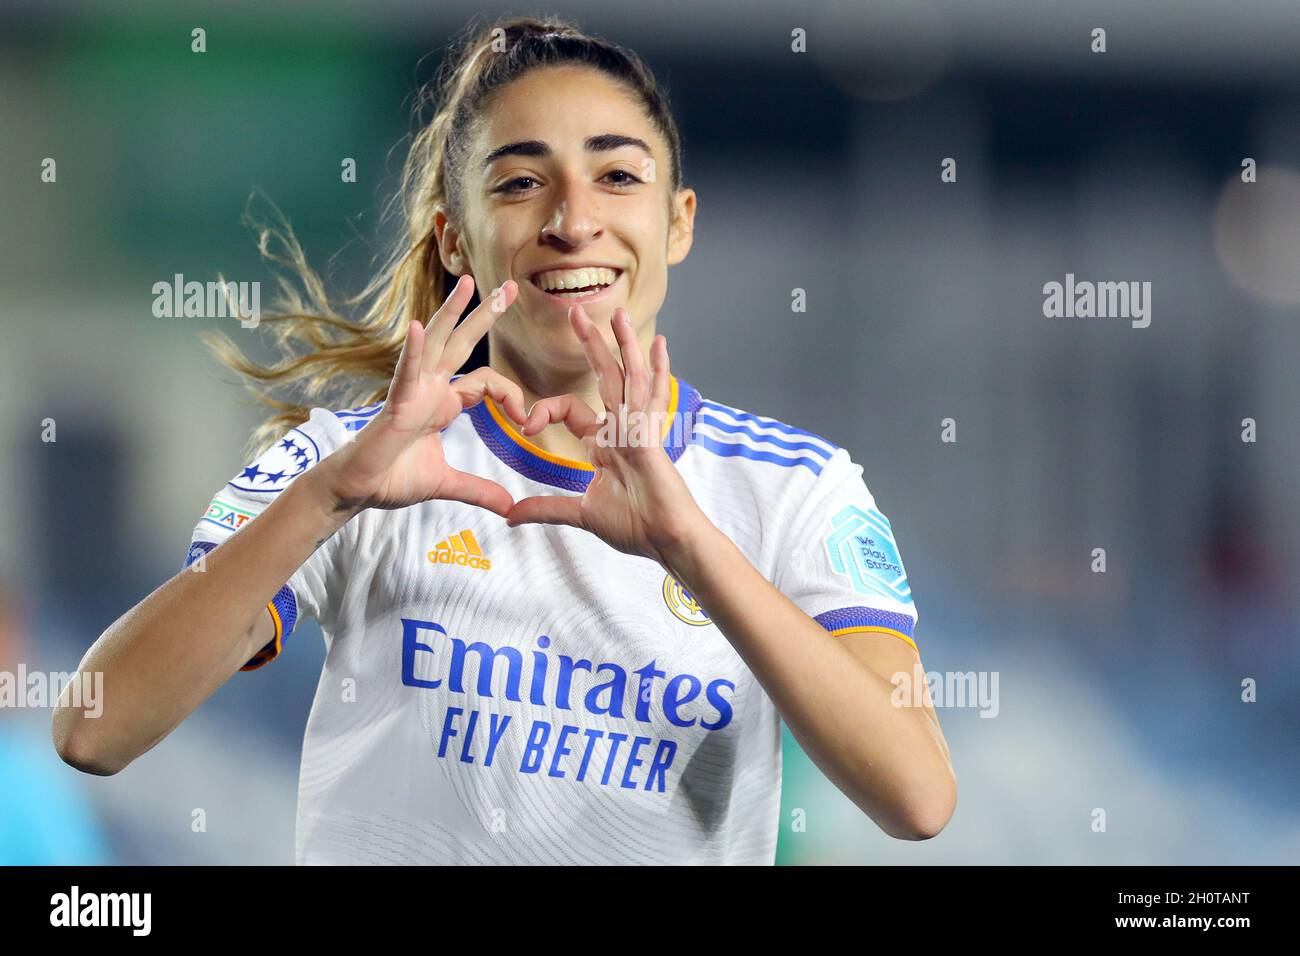 https://c8.alamy.com/comp/2H0TANT/olga-carmona-of-real-madrid-celebrates-after-scoring-goalduring-the-uefa-womens-champions-league-date-2-between-real-madrid-and-beioablik-played-at-alfredo-di-stefano-stadium-on-october-13-2021-in-madrid-spain-photo-by-alberto-molina-pressinphoto-2H0TANT.jpg